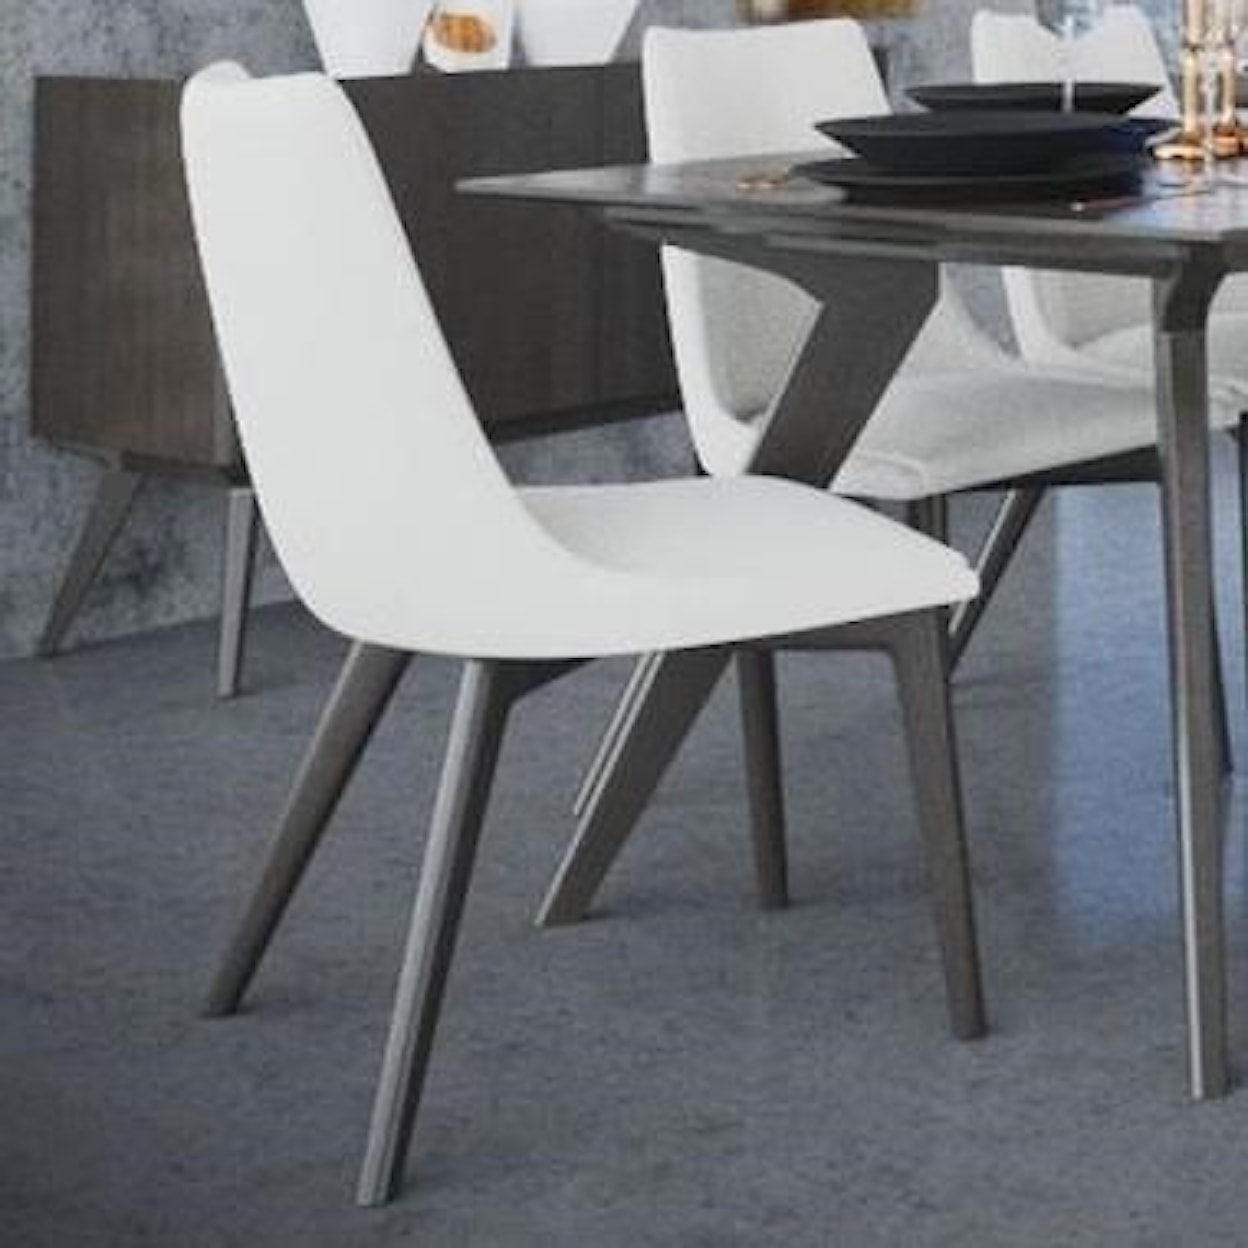 Canadel Downtown - Custom Dining Customizable Upholstered Side Chair